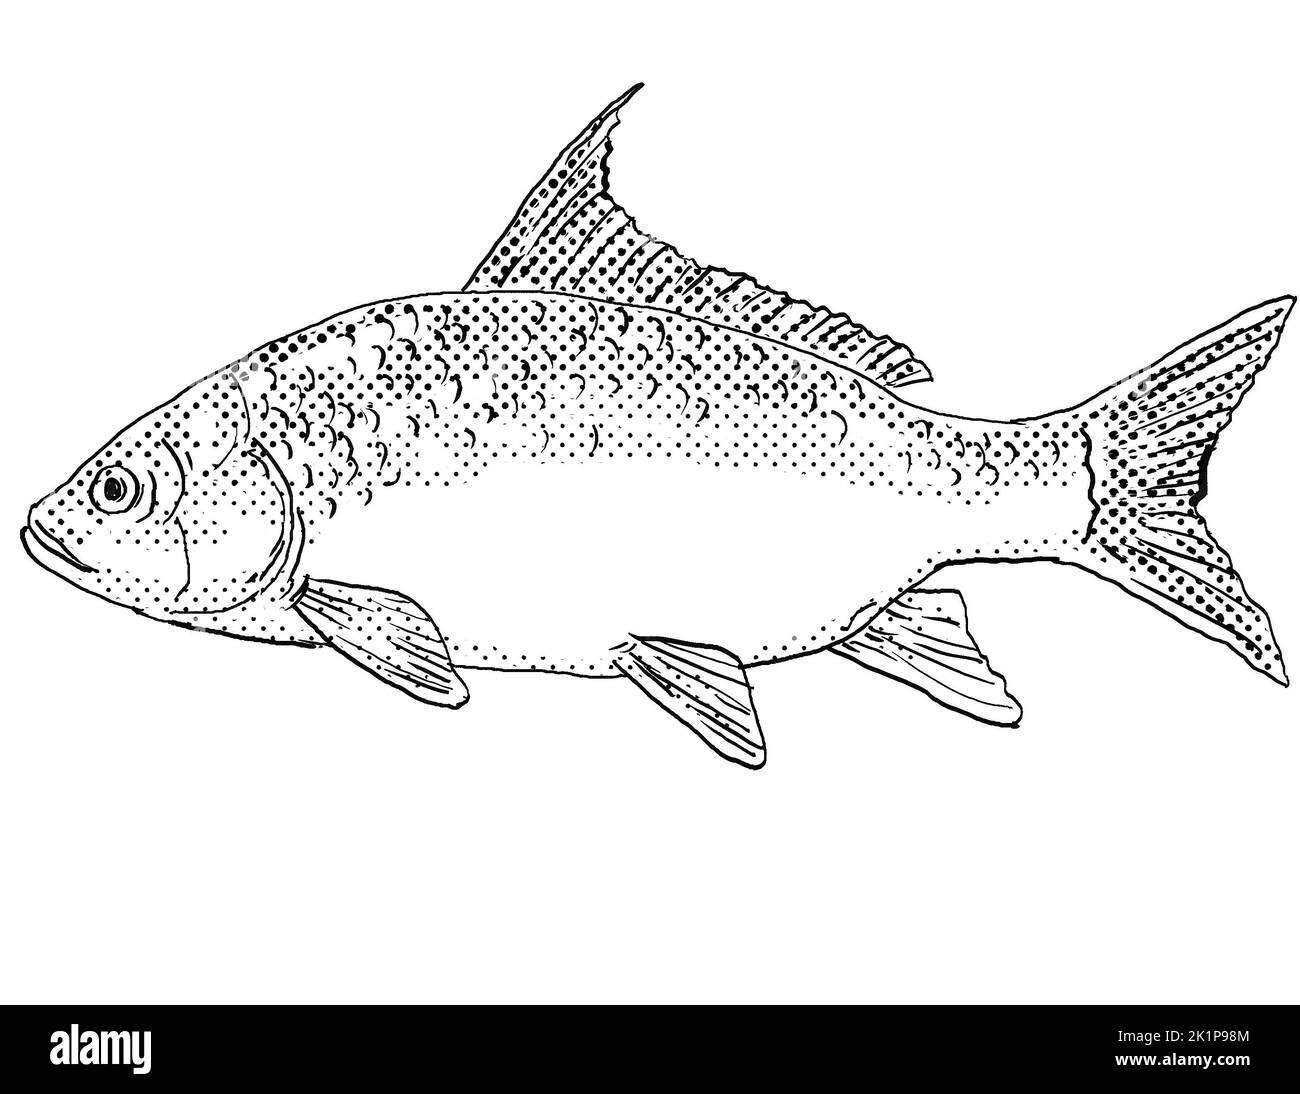 Cartoon style line drawing of a quillback Carpiodes cyprinus or quillback carpsucker a freshwater fish endemic to North America with halftone dots sha Stock Photo